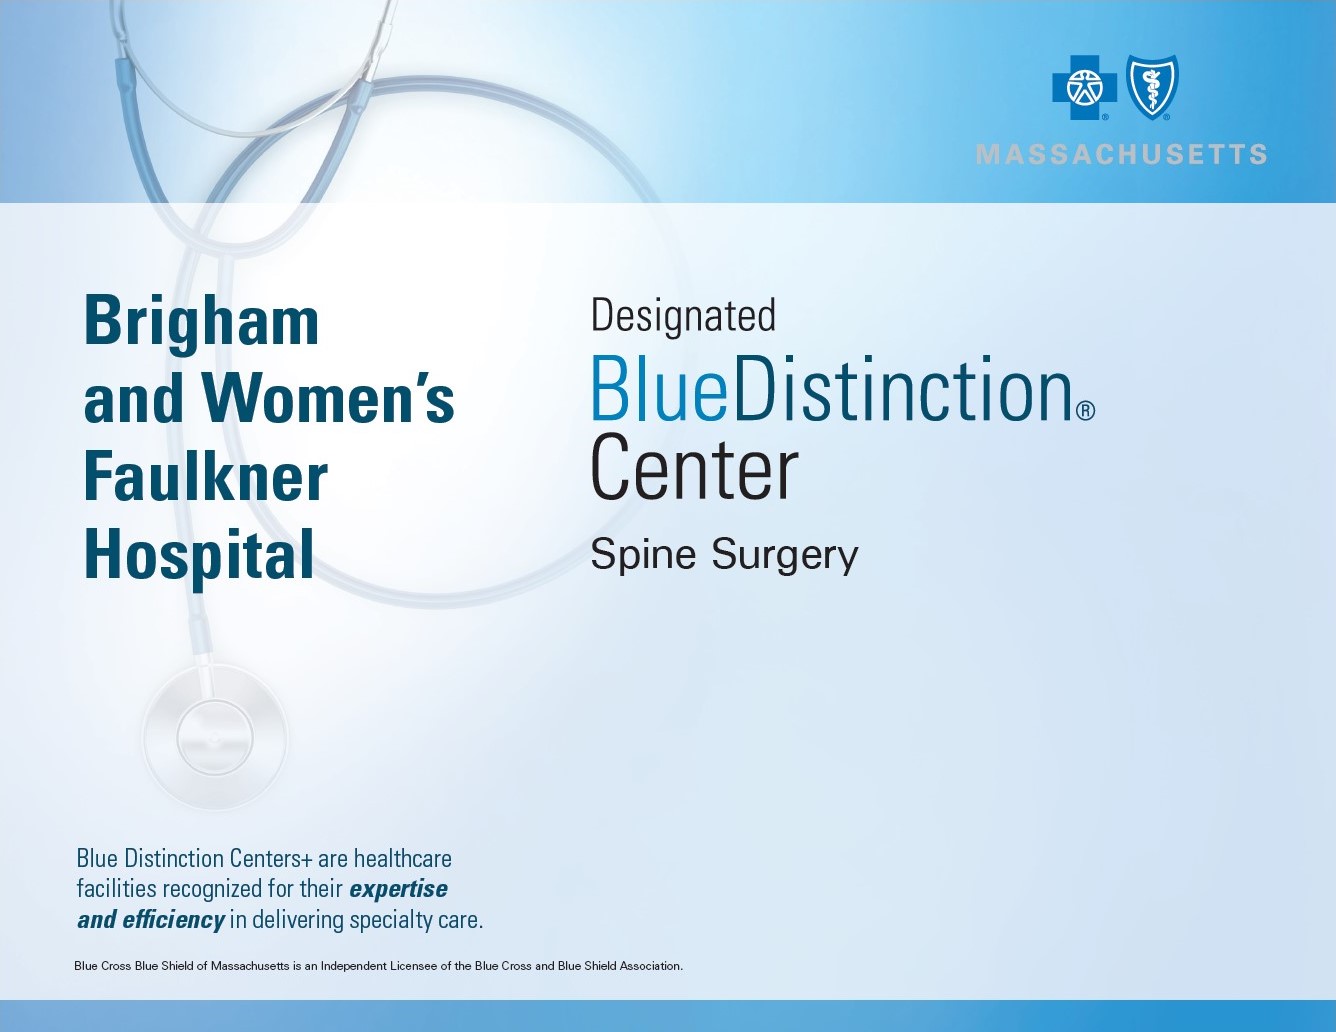 Blue Distinction Center designation for quality in spine surgery